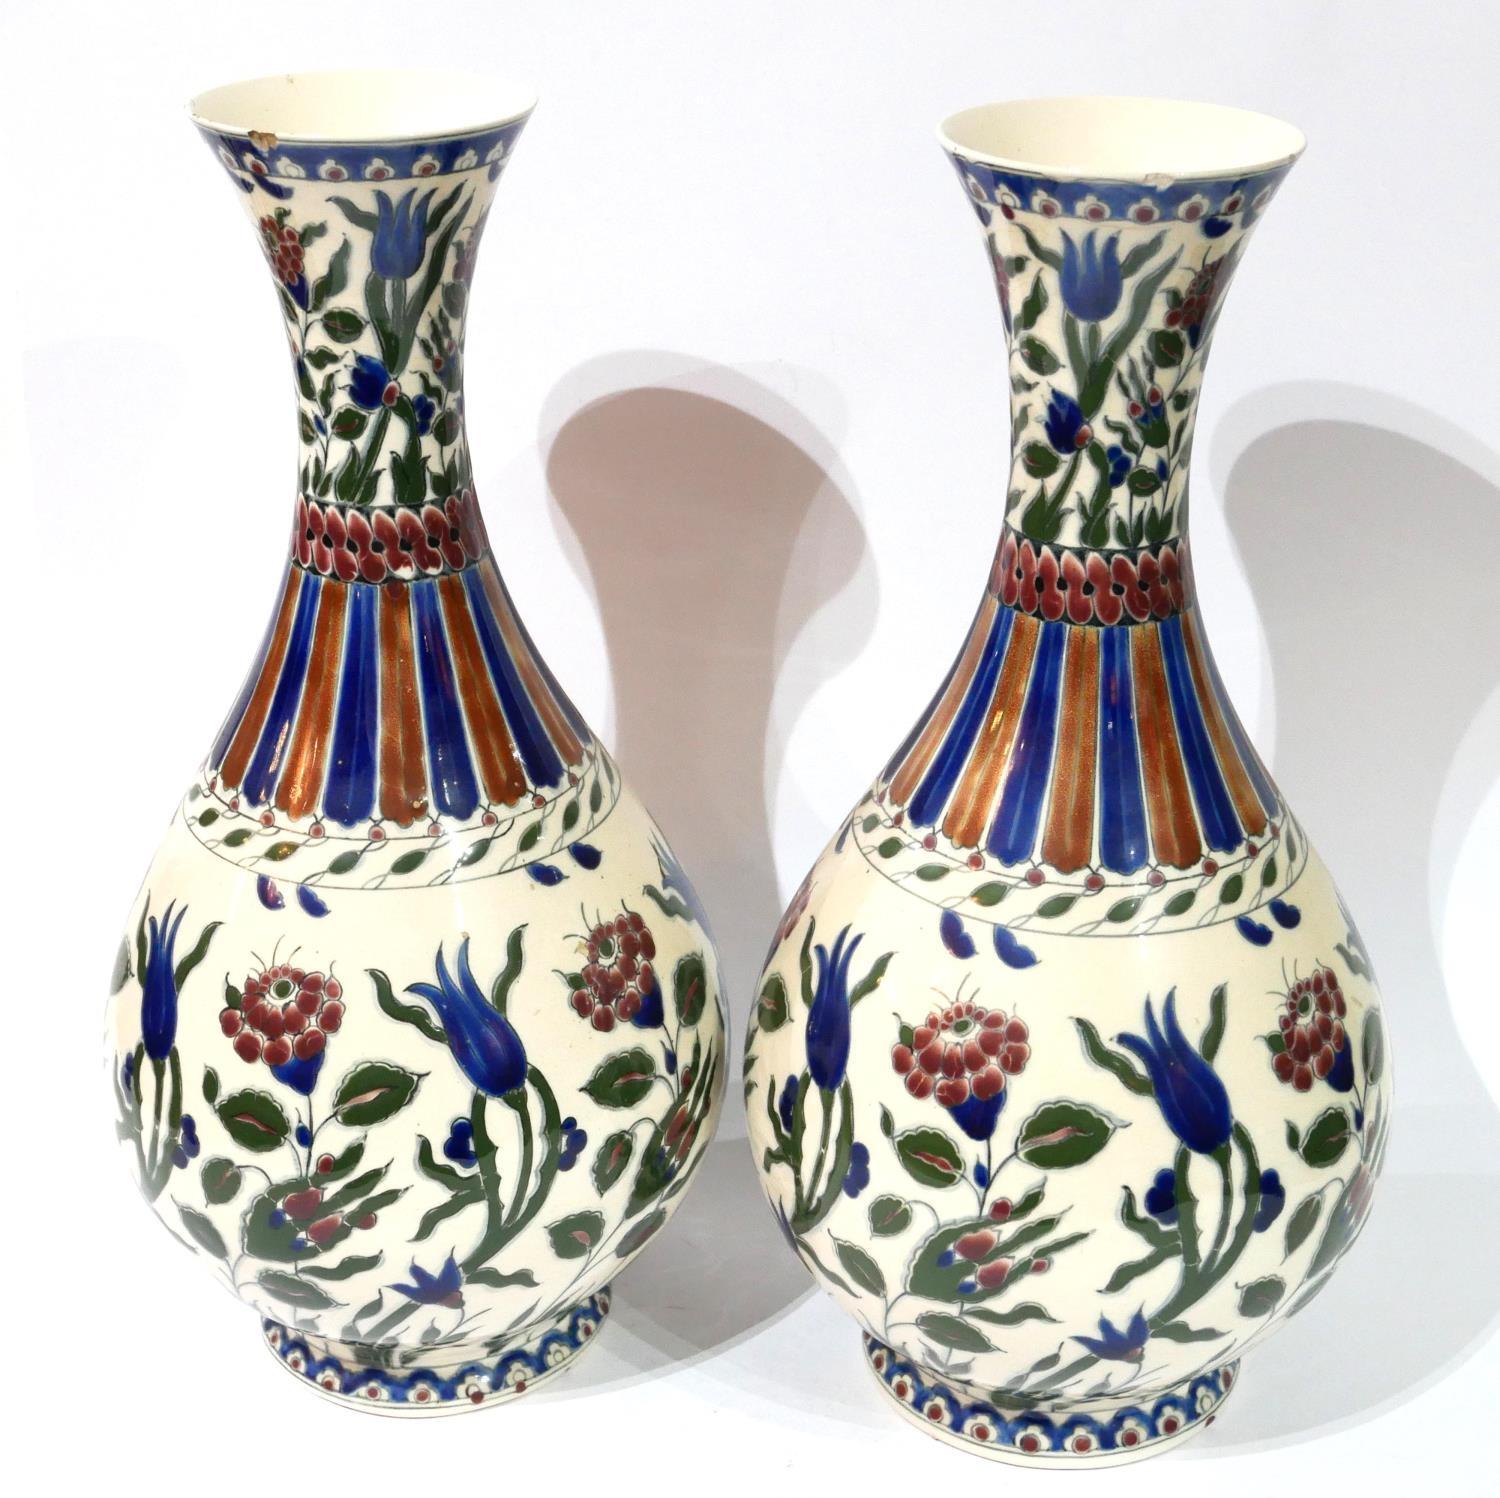 A PAIR OF LATE 19TH CENTURY MONUMENTAL HUNGARIAN ZSOLNAY-PÉCS POTTERY PYRIFORM VASES On a short